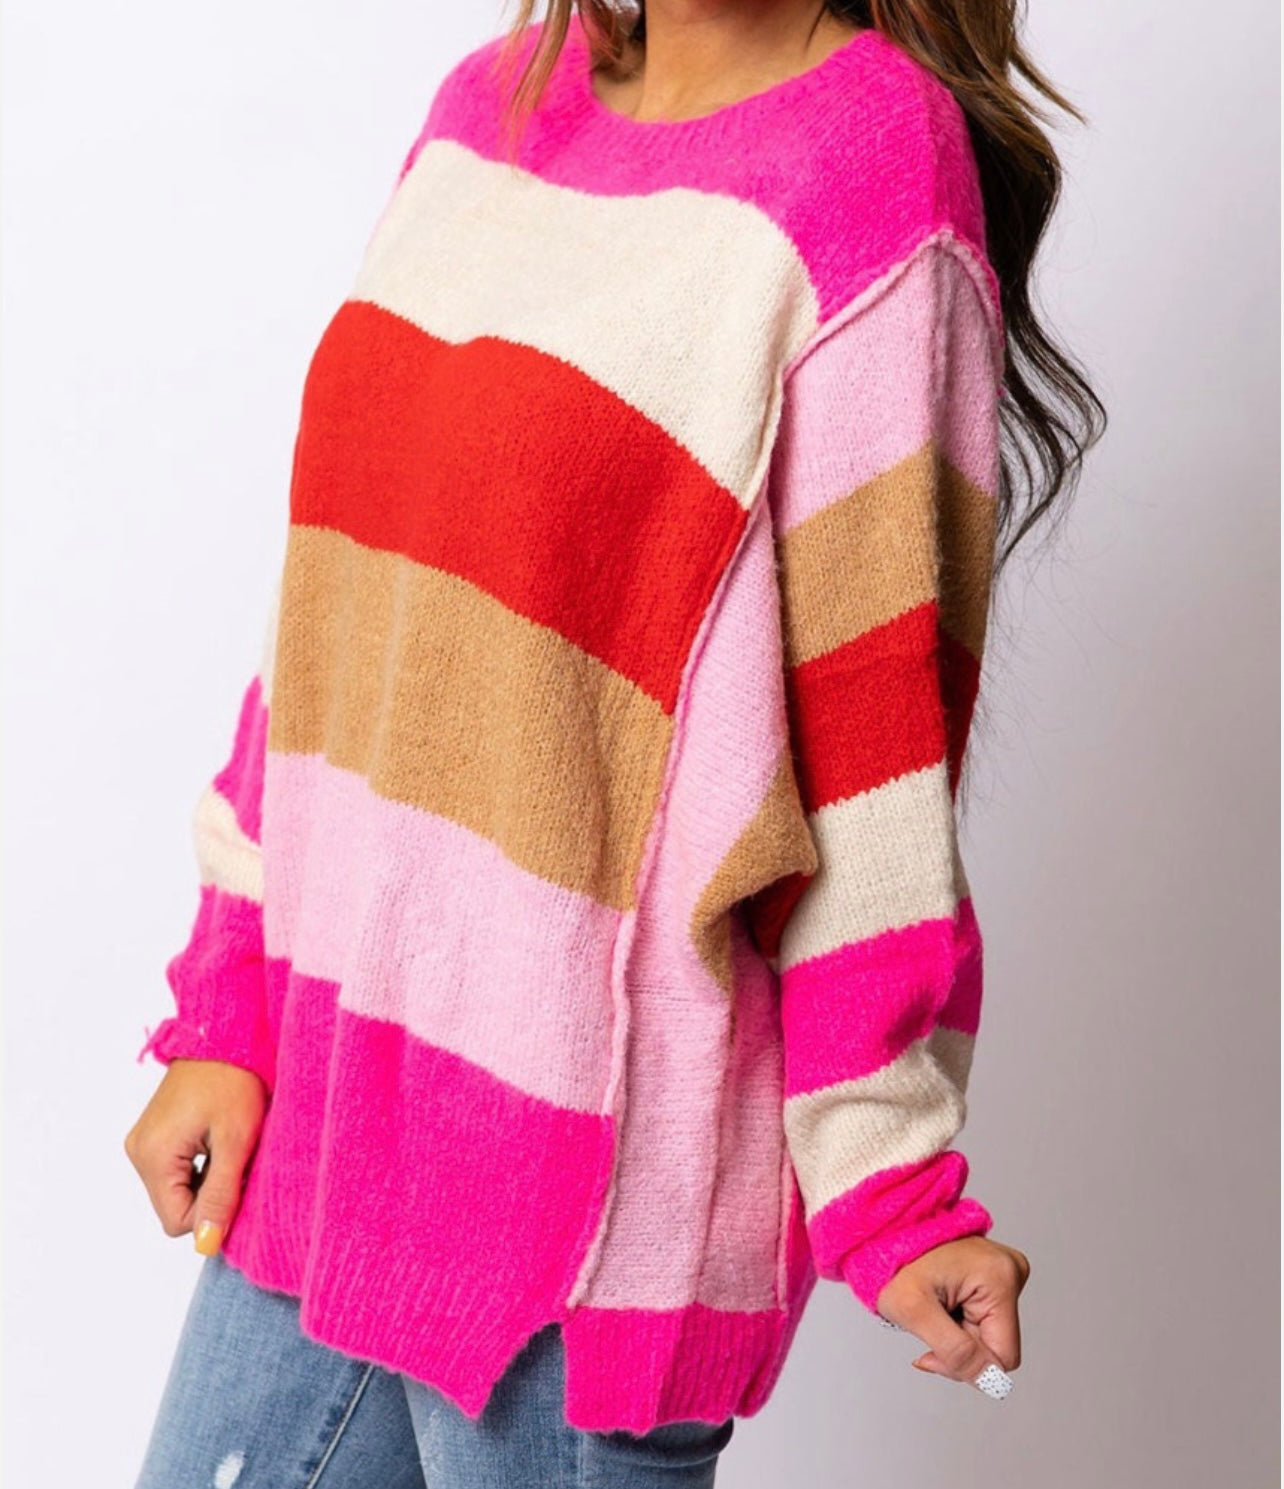 Colorful Stripes Soft Loose Fit Sweater - Regular & Plus